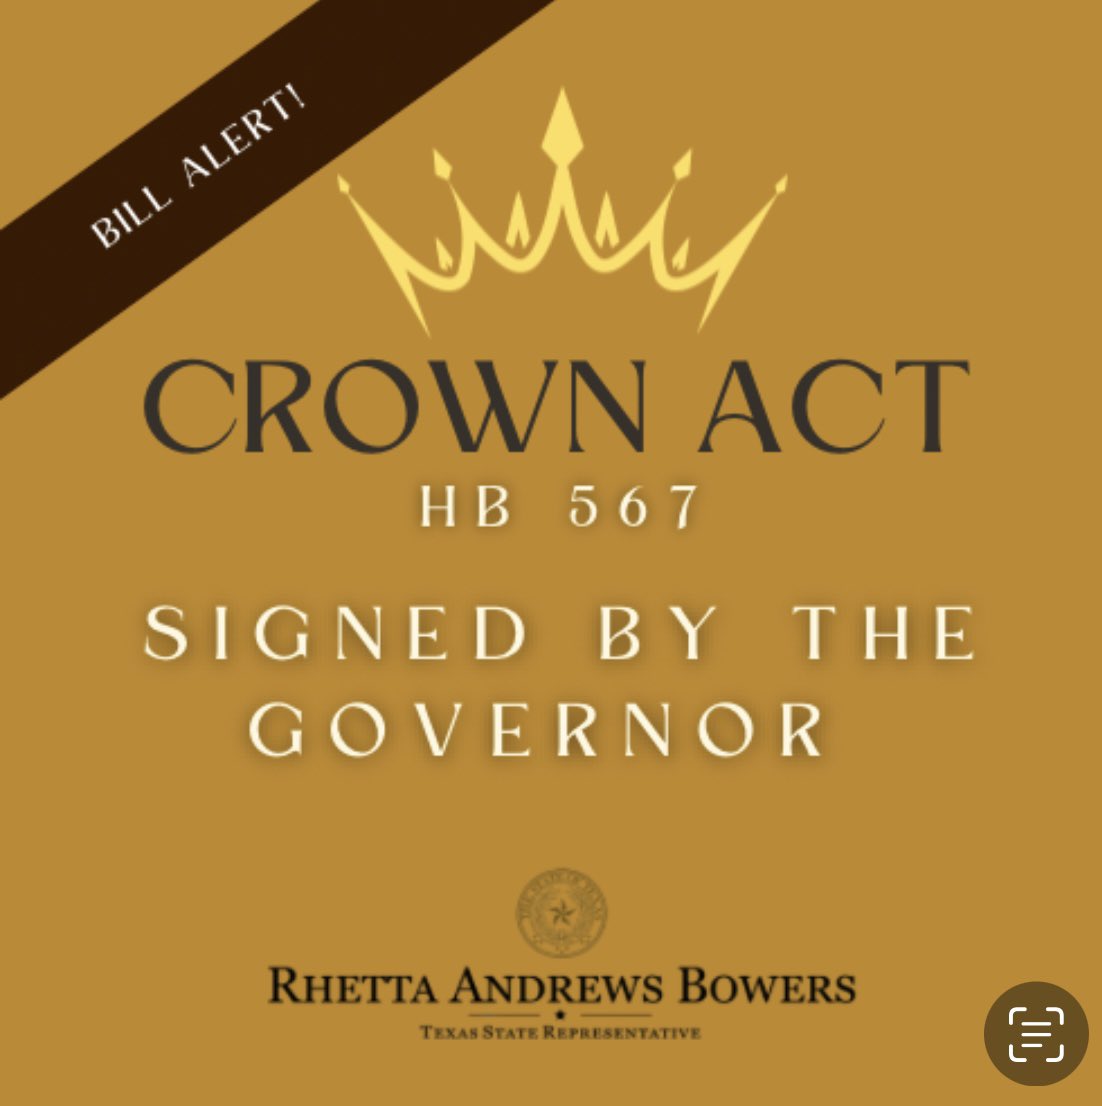 BREAKING NEWS - The Governor has signed HB 567, the Texas CROWN Act! Thank you to Adjoa B-a Asamoah, Co-Creator of the CROWN Coalition, and Senator Borris L. Miles, our Senate Sponsor, and the countless tireless advocates for all of your hard work. We did it! #txlege #CrownAct